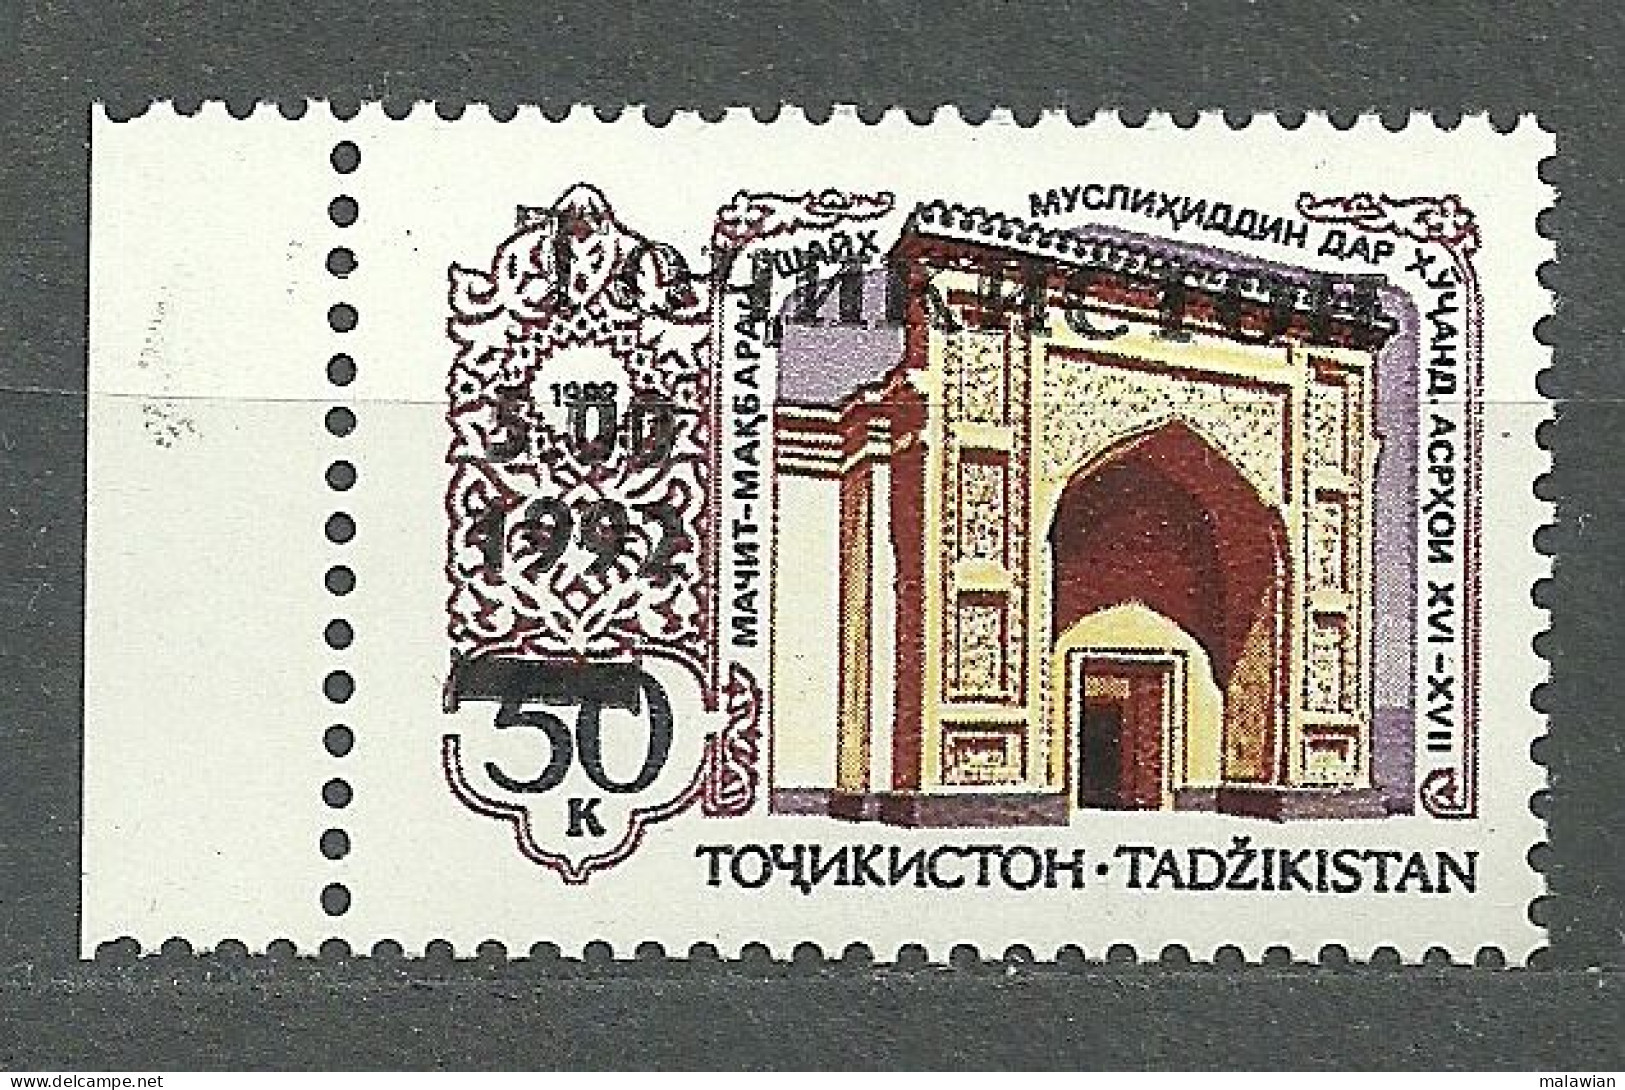 Tajikistan, 1992 (#5b), Architecture Monument, Mosque Mausoleum Khodjent, Denkmal, Islamisches Moschee, Surcharge - 1v - Mosques & Synagogues